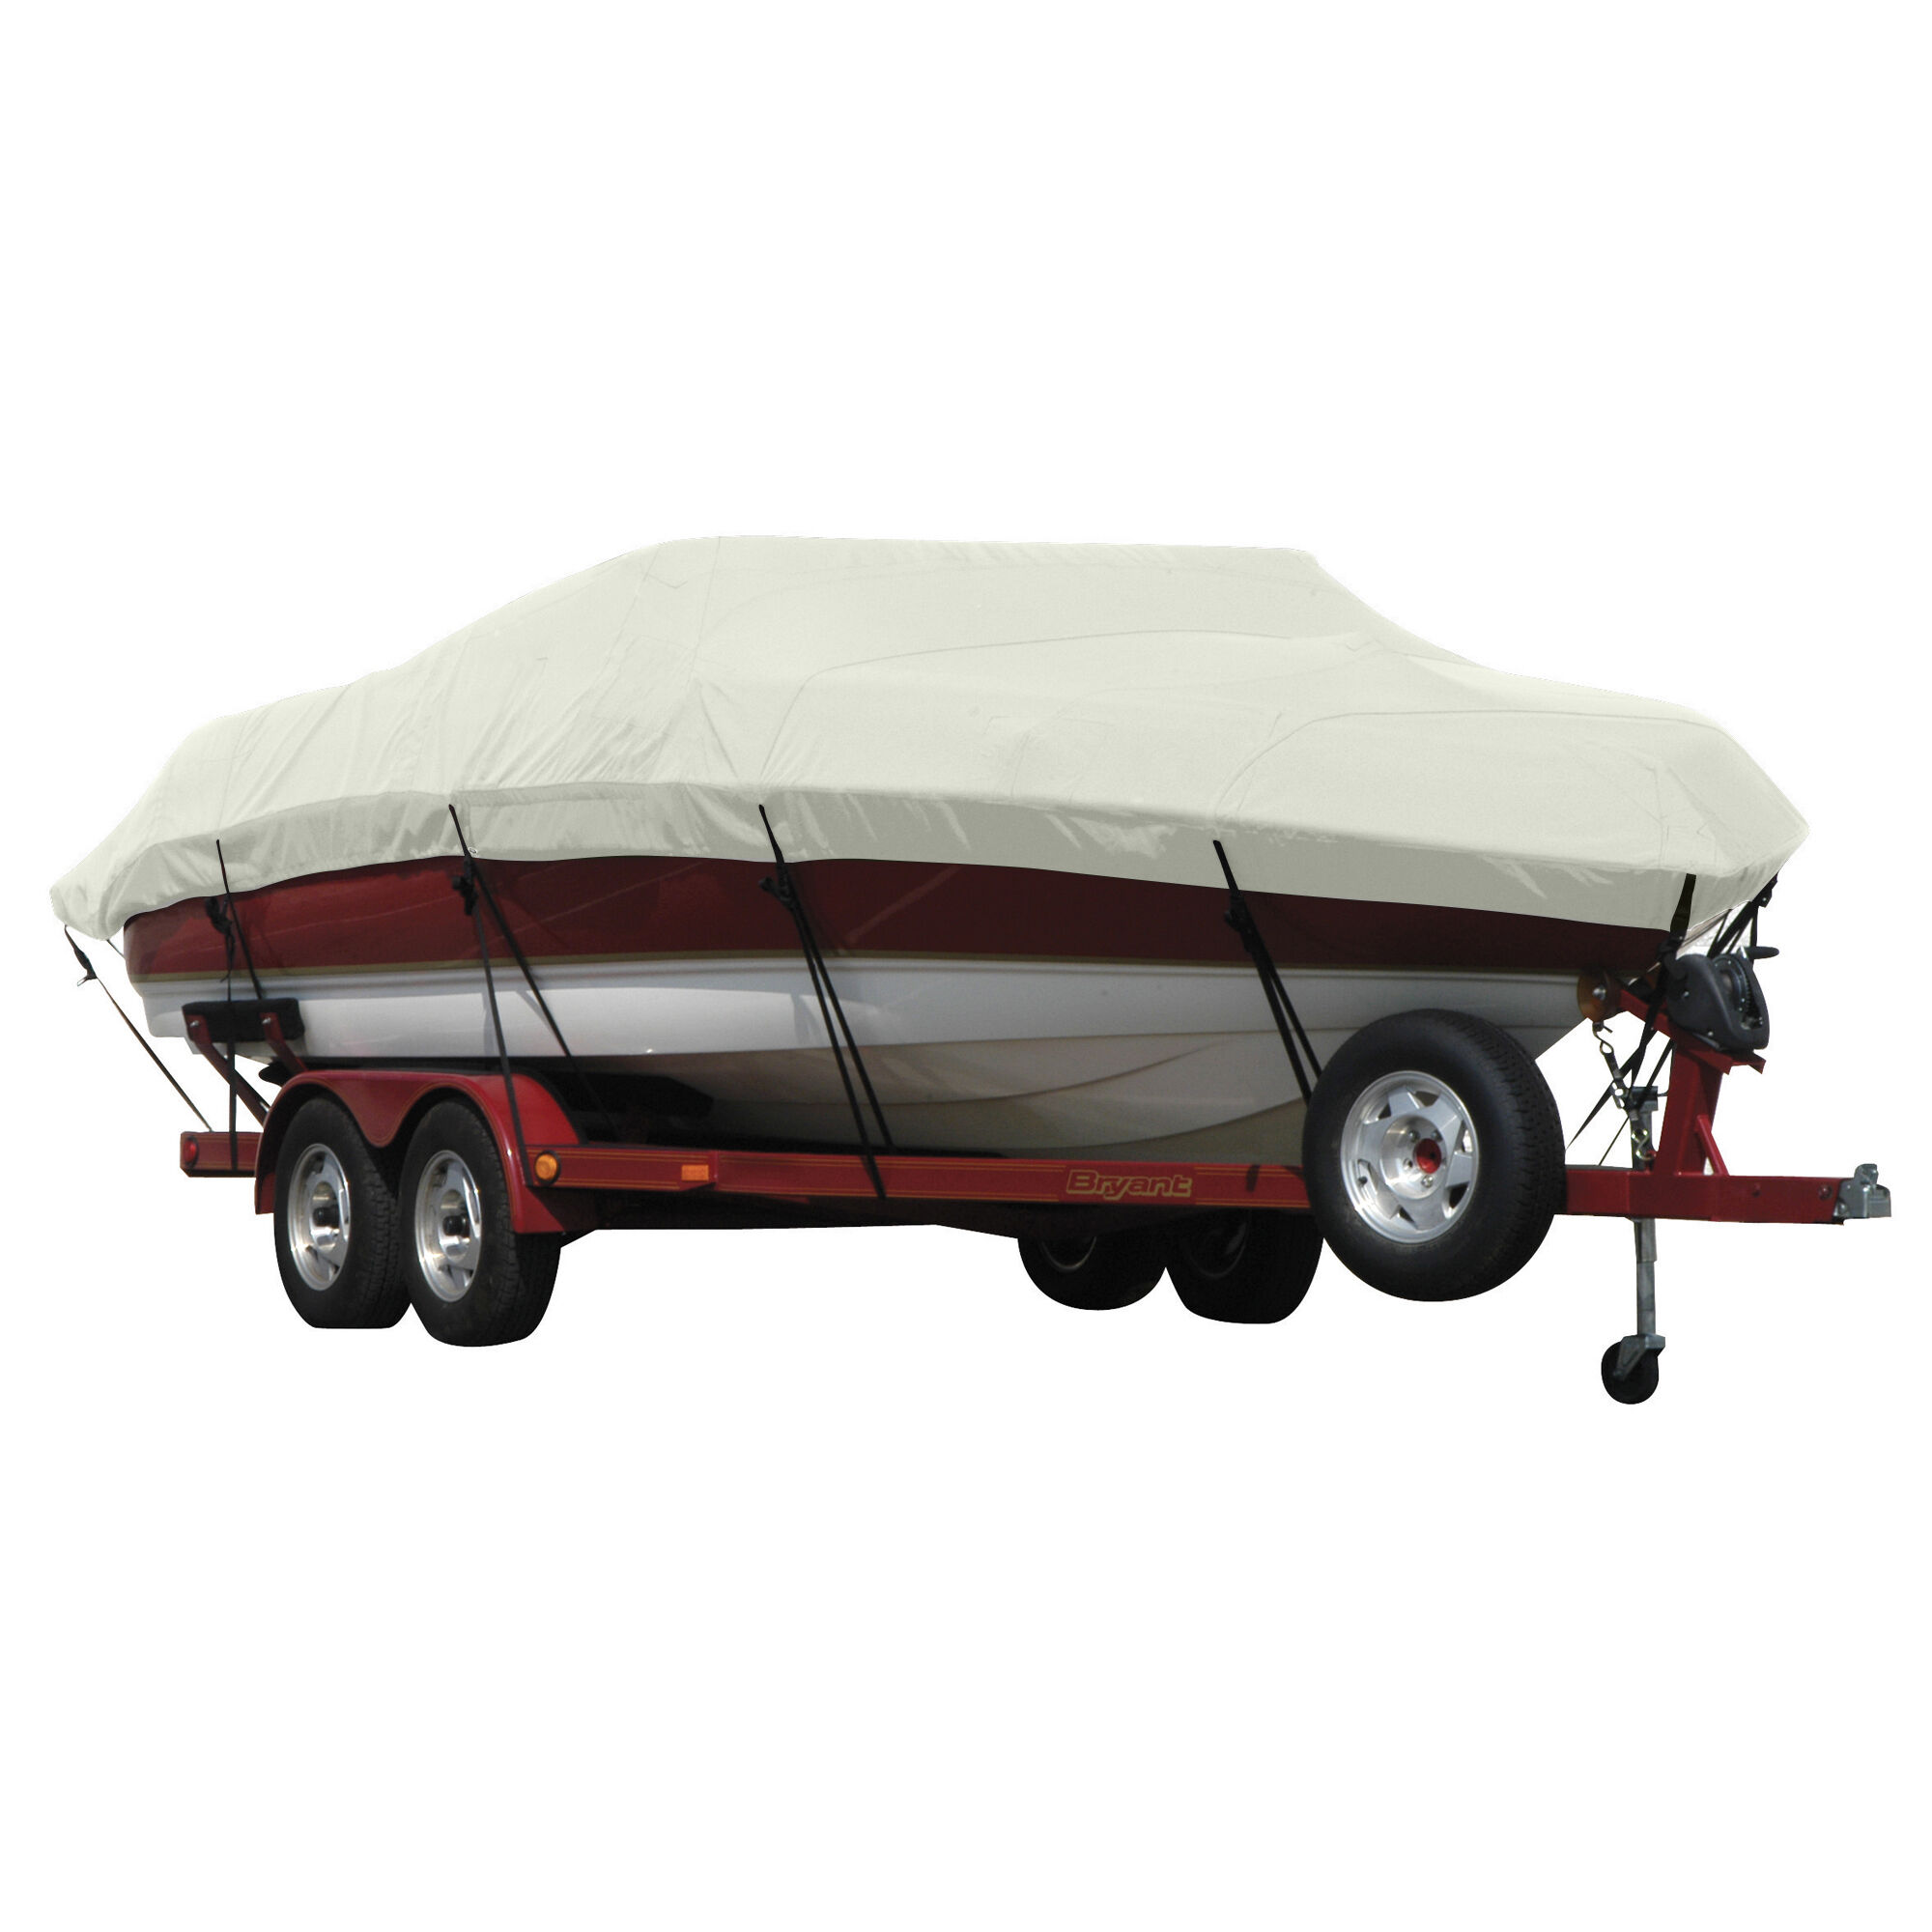 Covermate Exact Fit Sunbrella Boat Cover for Advantage 34 Party Cat 34 Party Cat. Silver